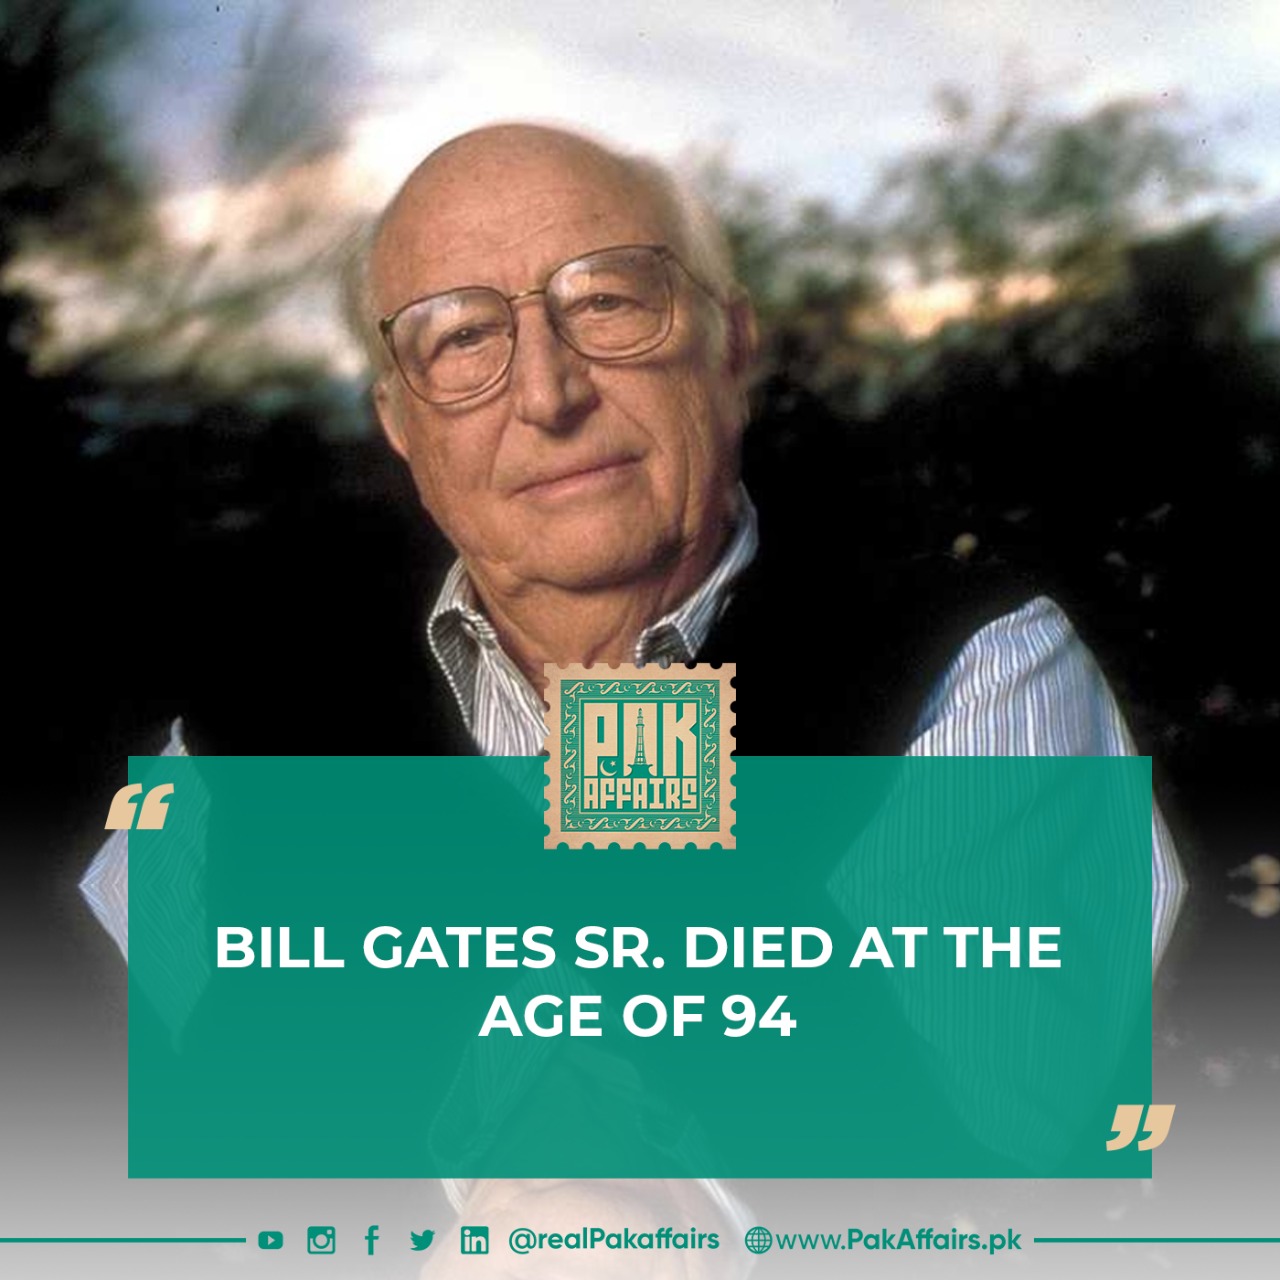 Bill Gates Sr. died at the age of 94